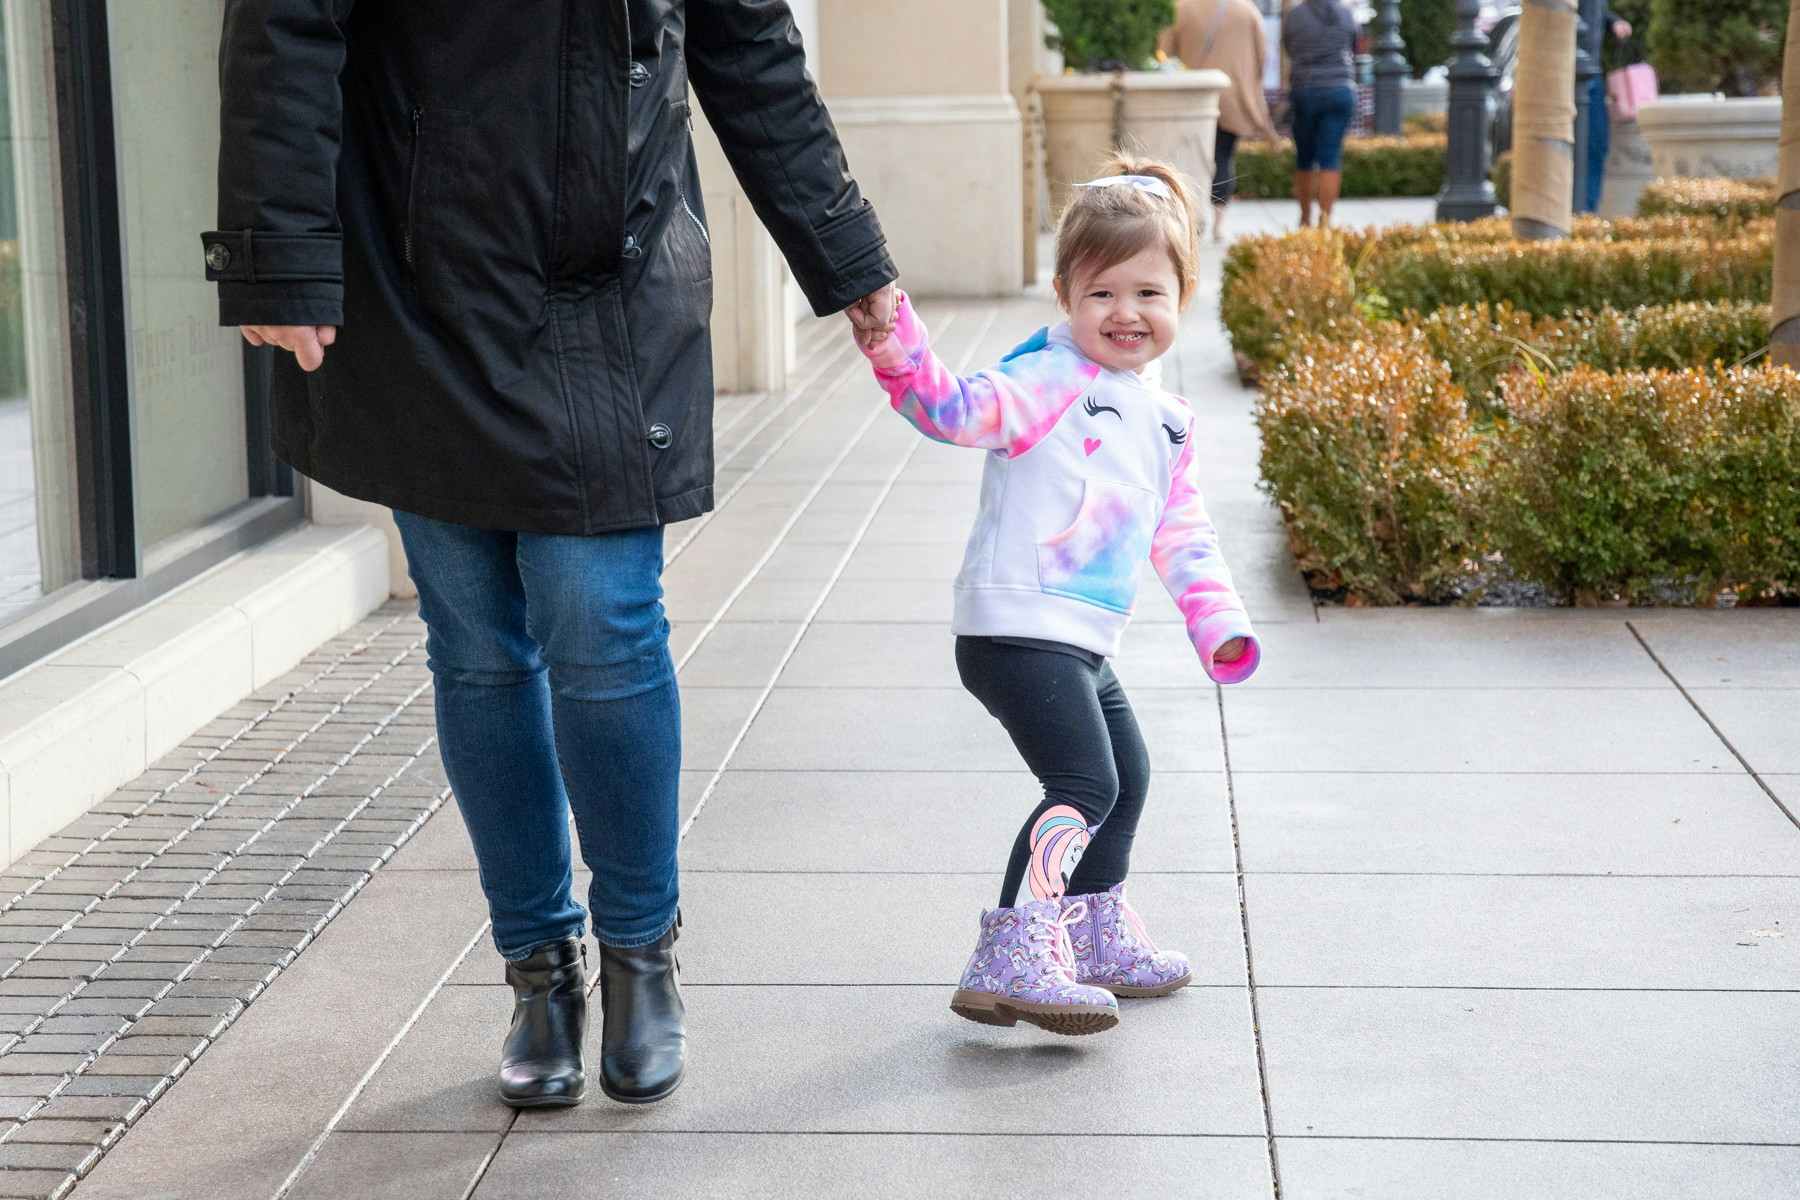 Toddler holding mom's hand smiling wearing unicorn outfit FabKids